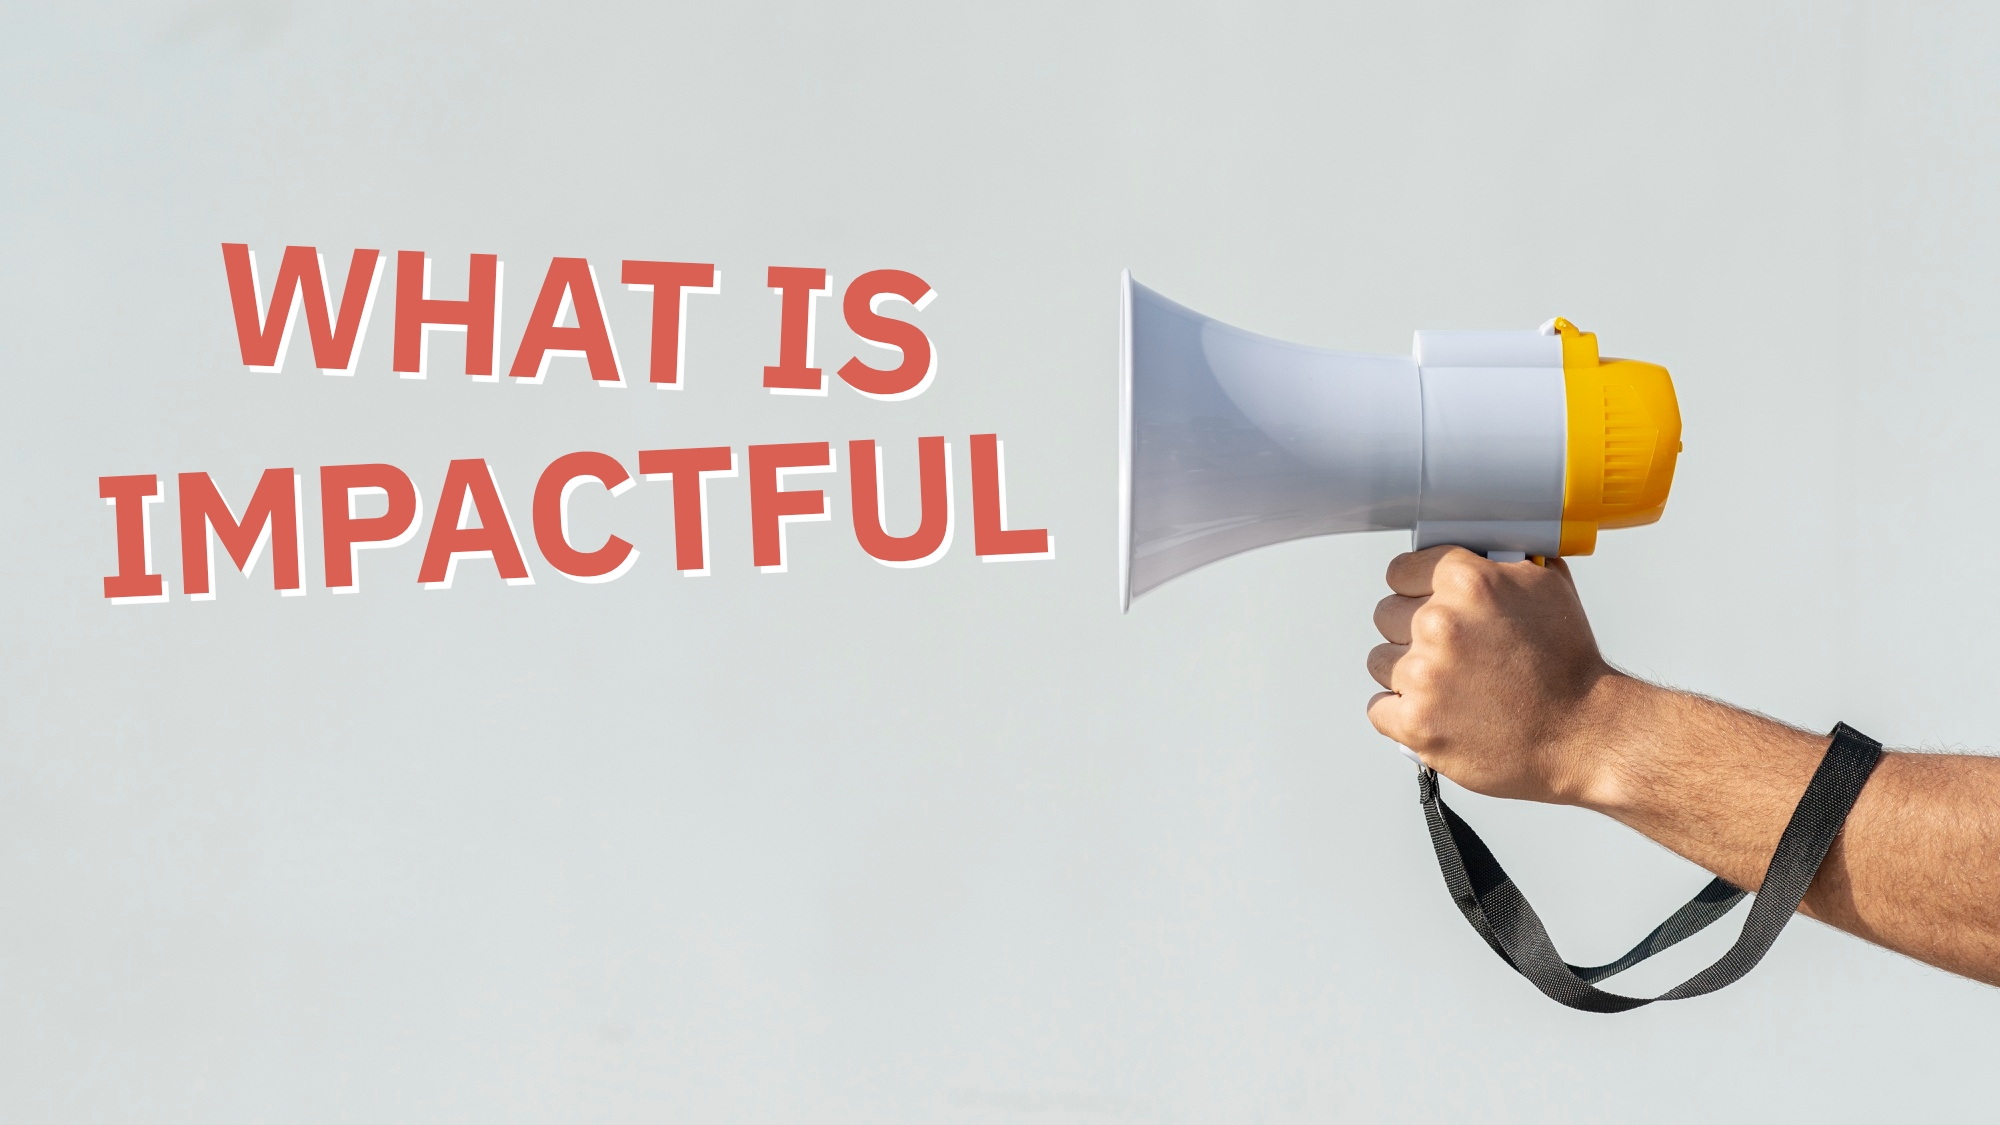 An image of a megaphone with the text "what is impactful"